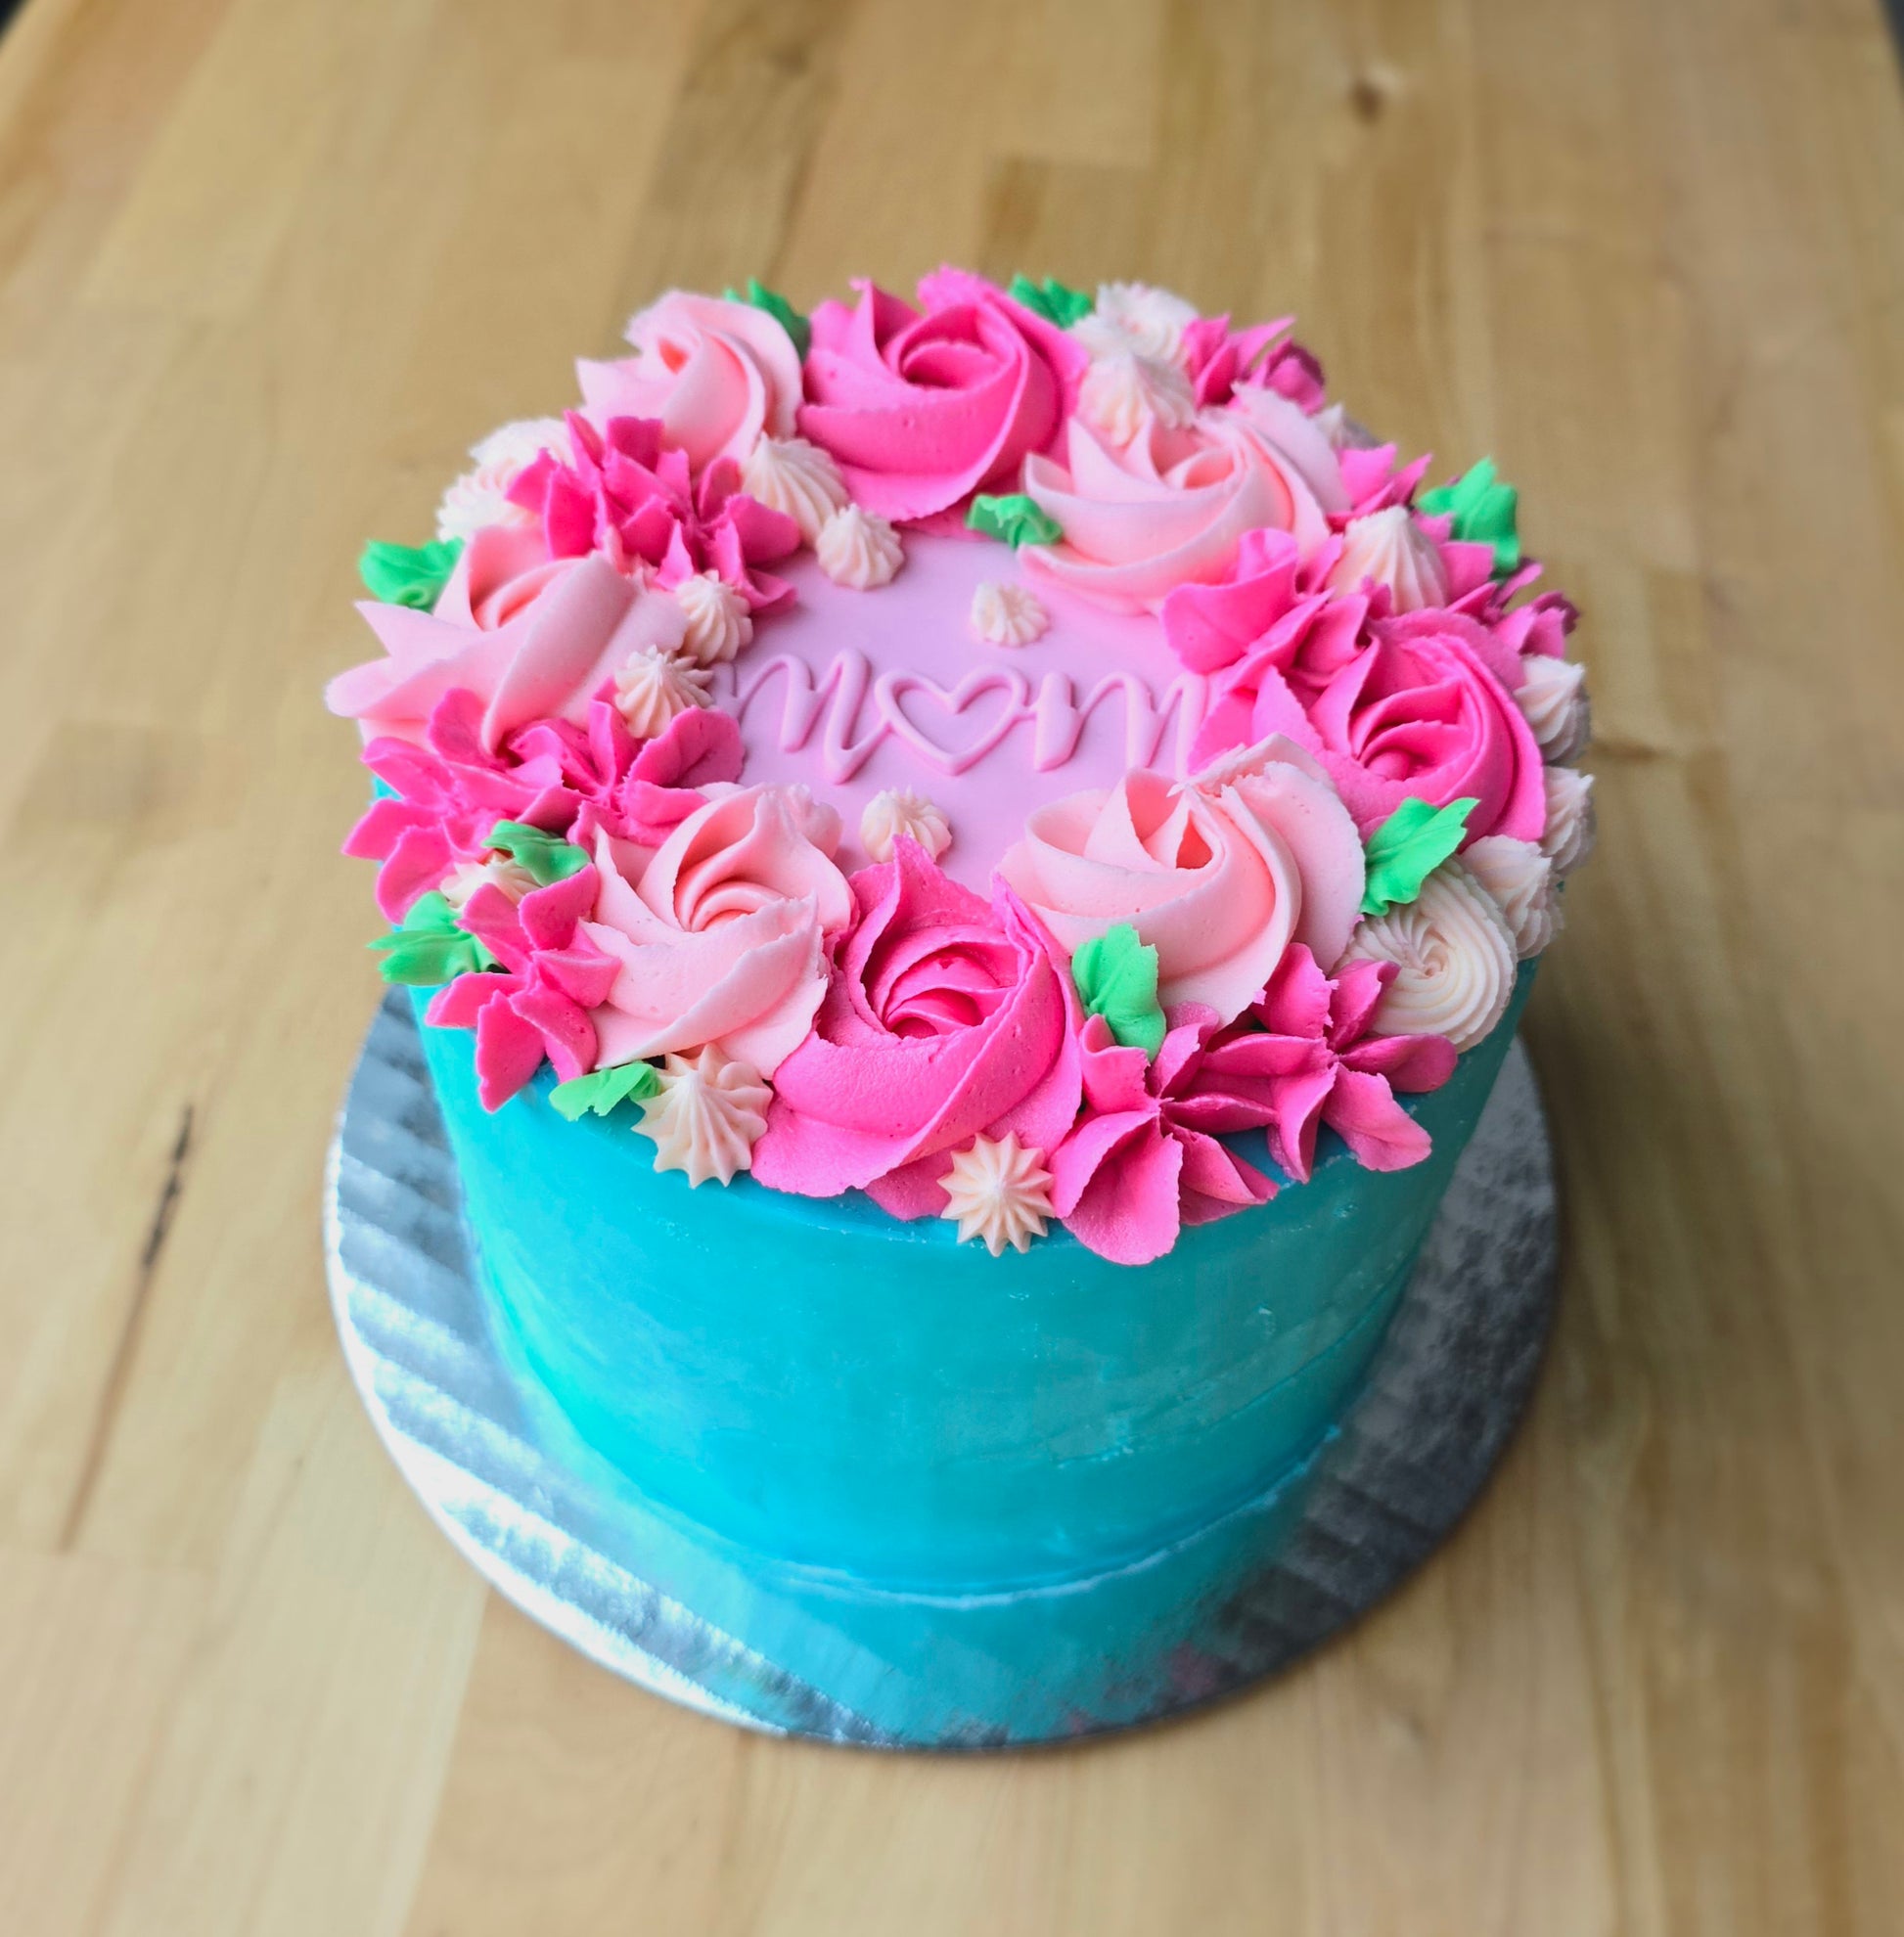 A bright floral-themed cake available during a Mother's Day workshop, with blue frosting on the sides, and on the top: pink rosettes, green leaves, and mom written in the center. 